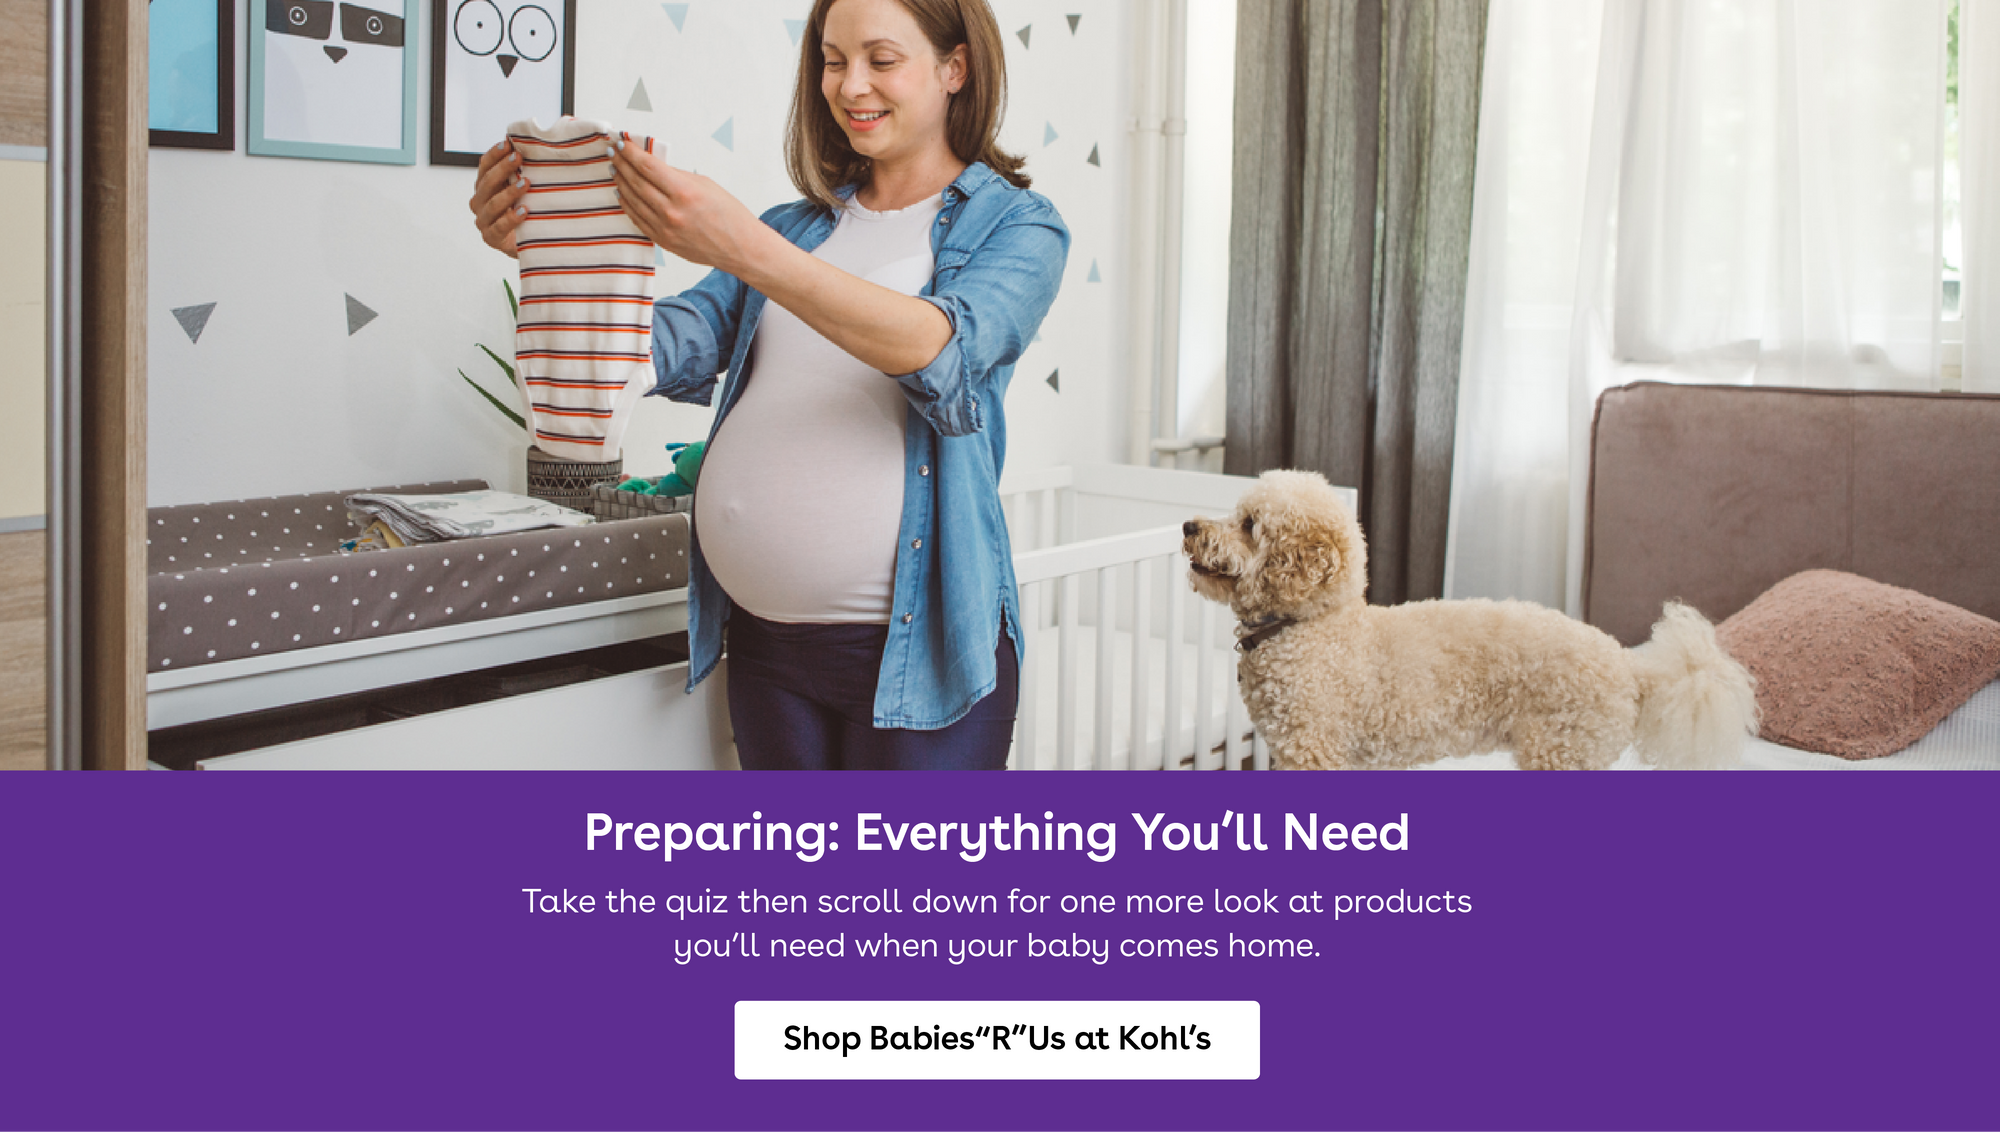 Preparing everything you will need. take the quiz then scroll down for one more look at products you will need when your baby comes home.